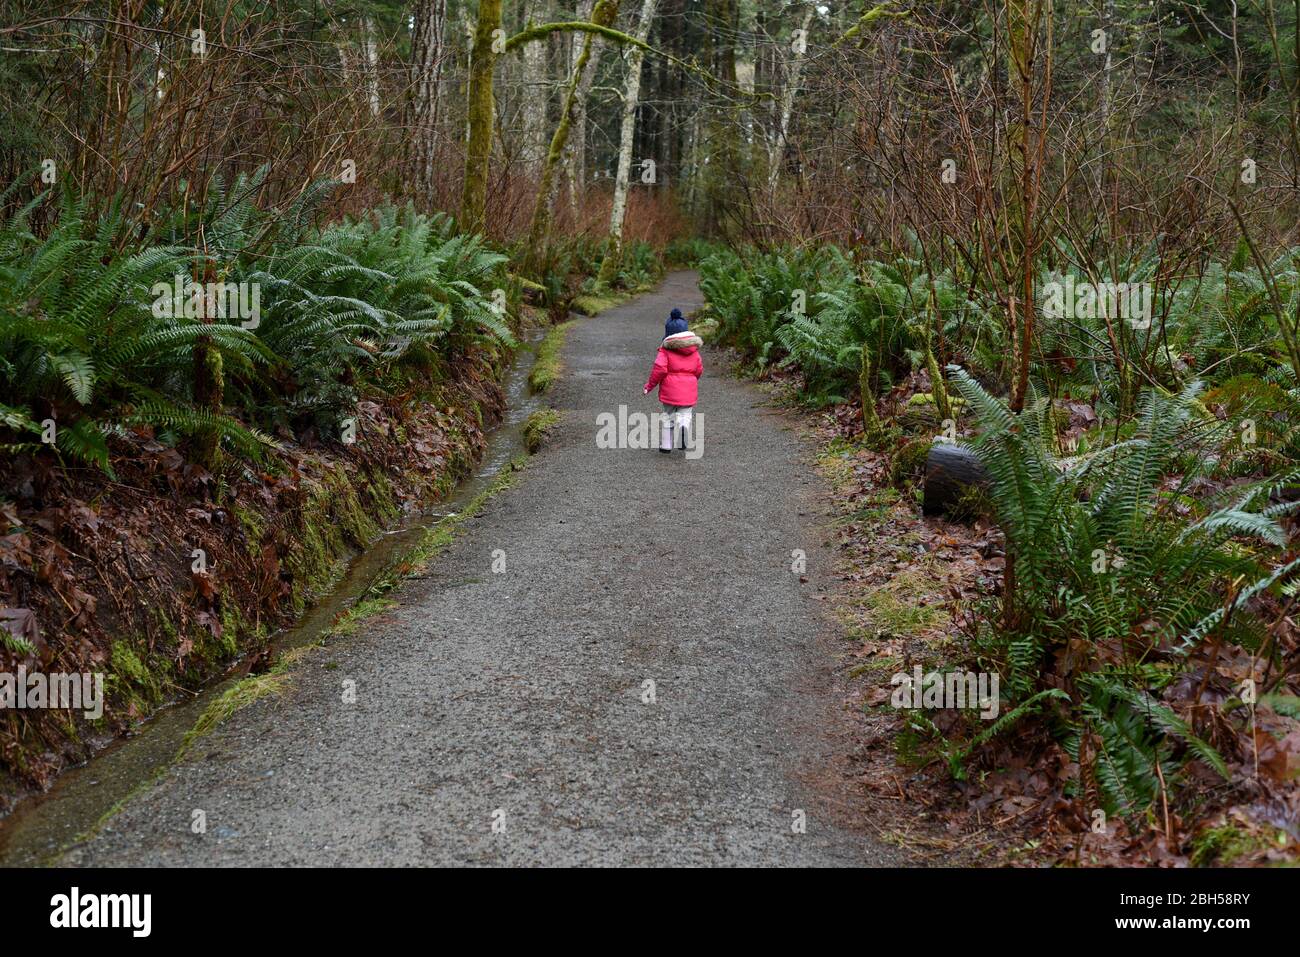 A young girl, wearing a pink winter coat and toque, runs down a path between green ferns in a park near Comox and Courtenay British Columbia, Canada o Stock Photo